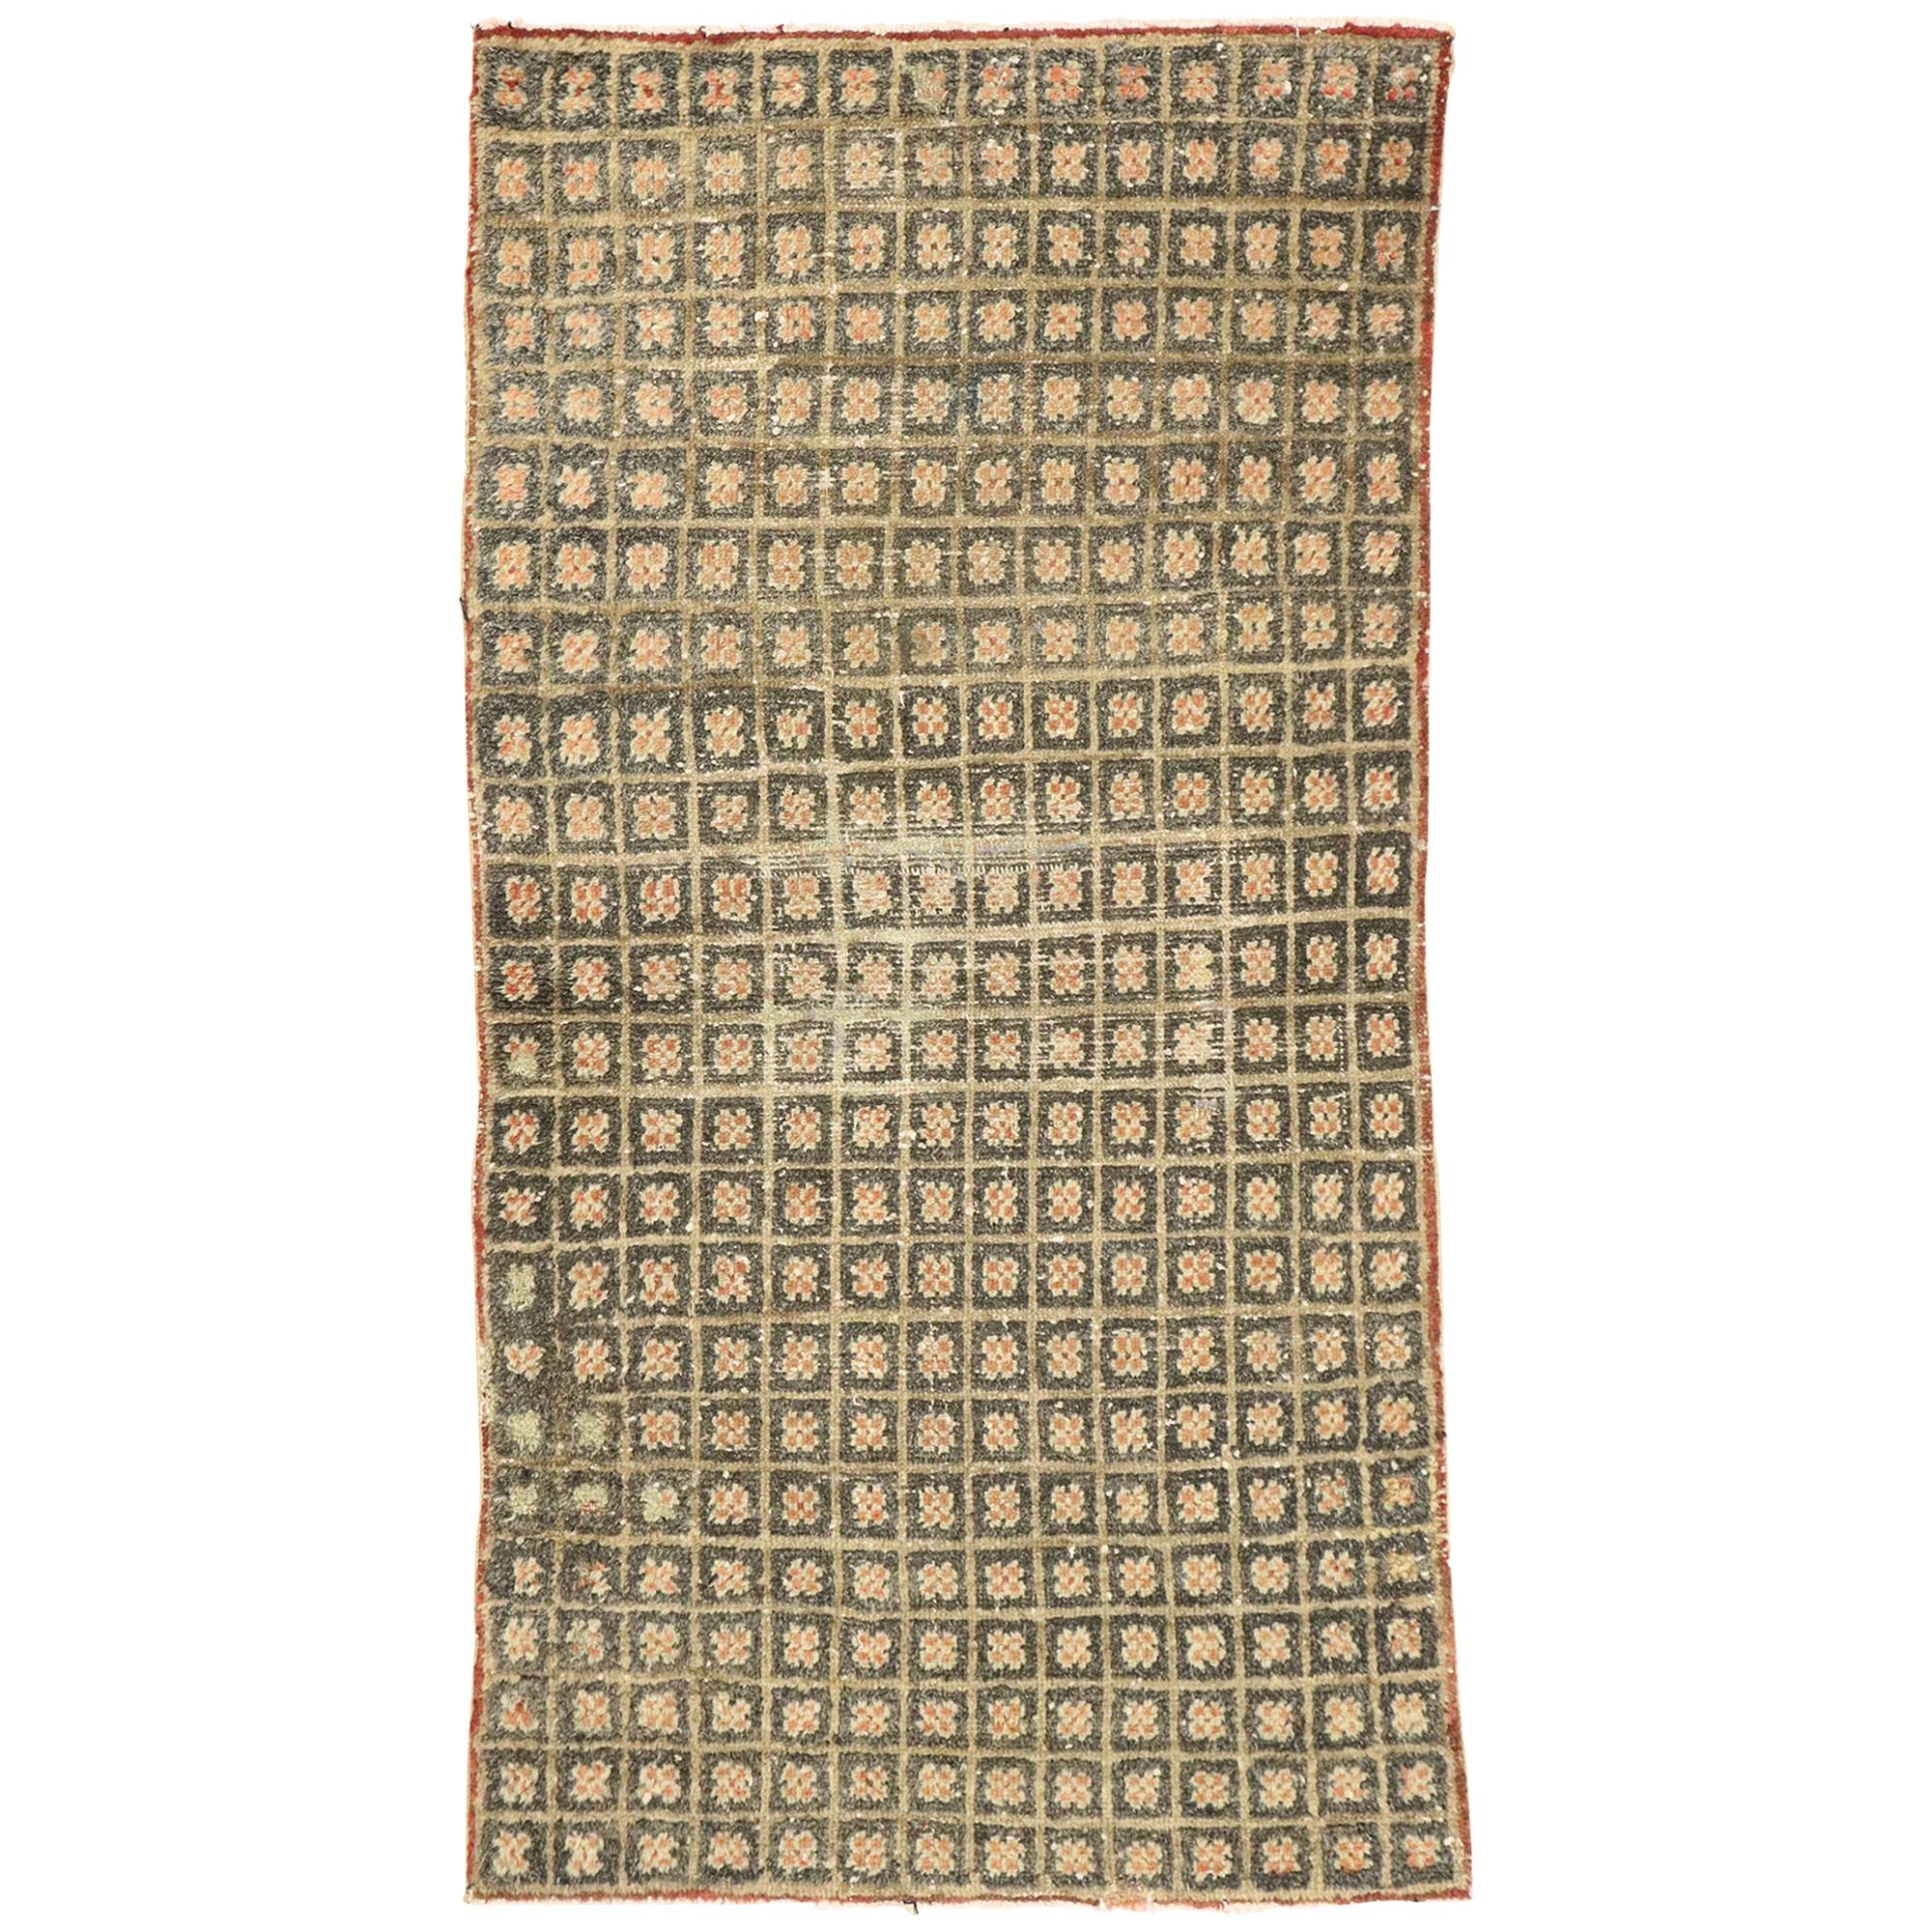 Distressed Vintage Turkish Tulu Accent Rug with Mid-Century Modern Cubist Style